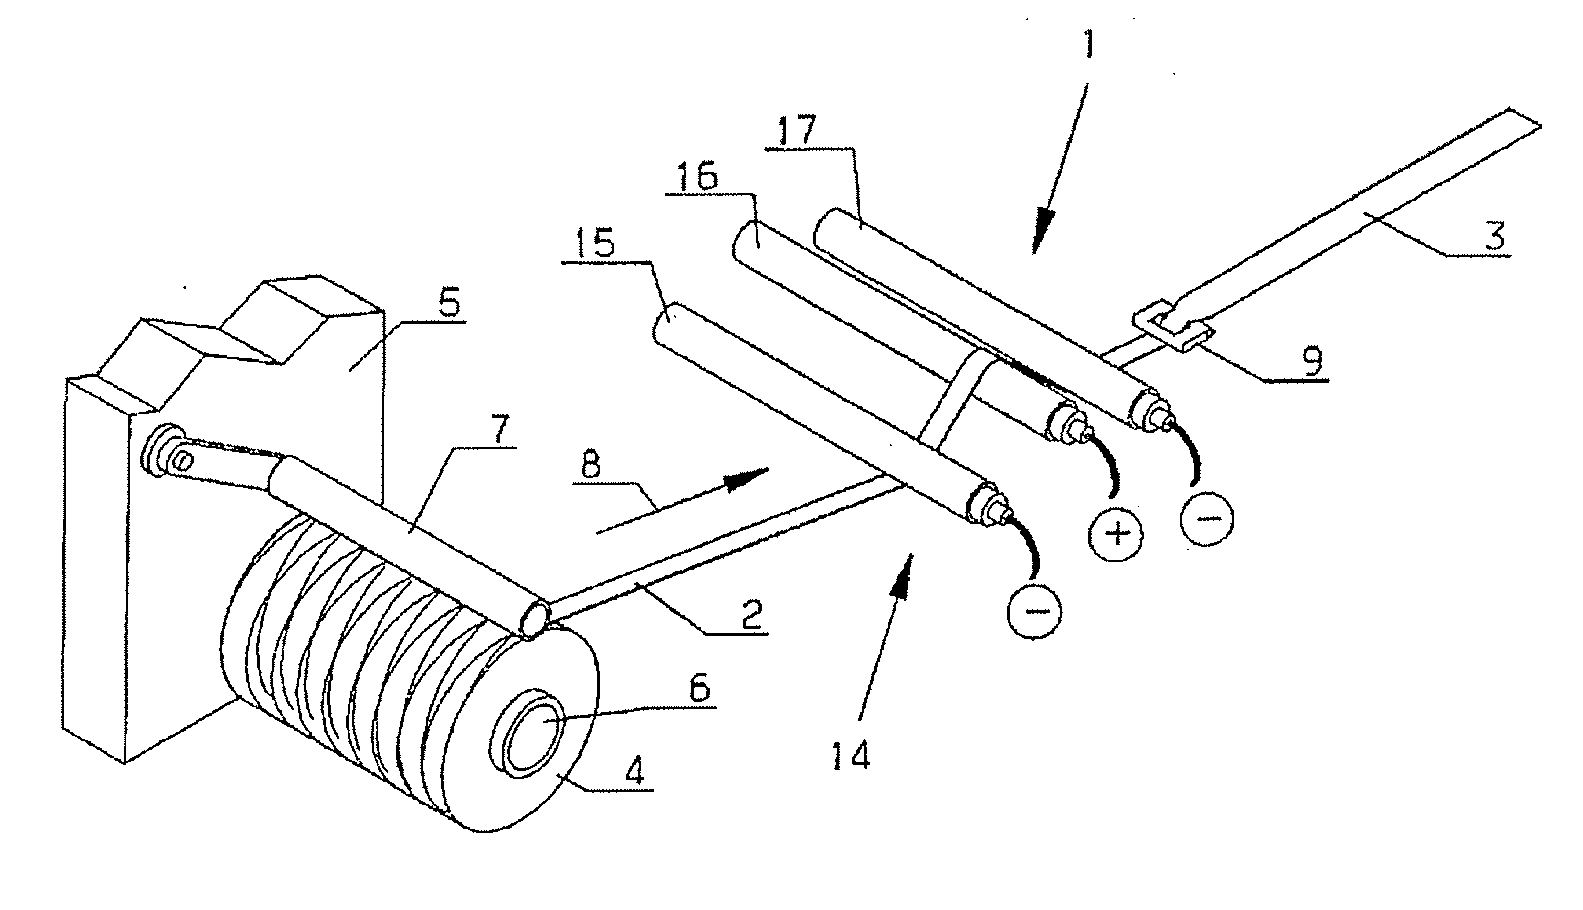 Device and method for spreading a carbon fiber hank